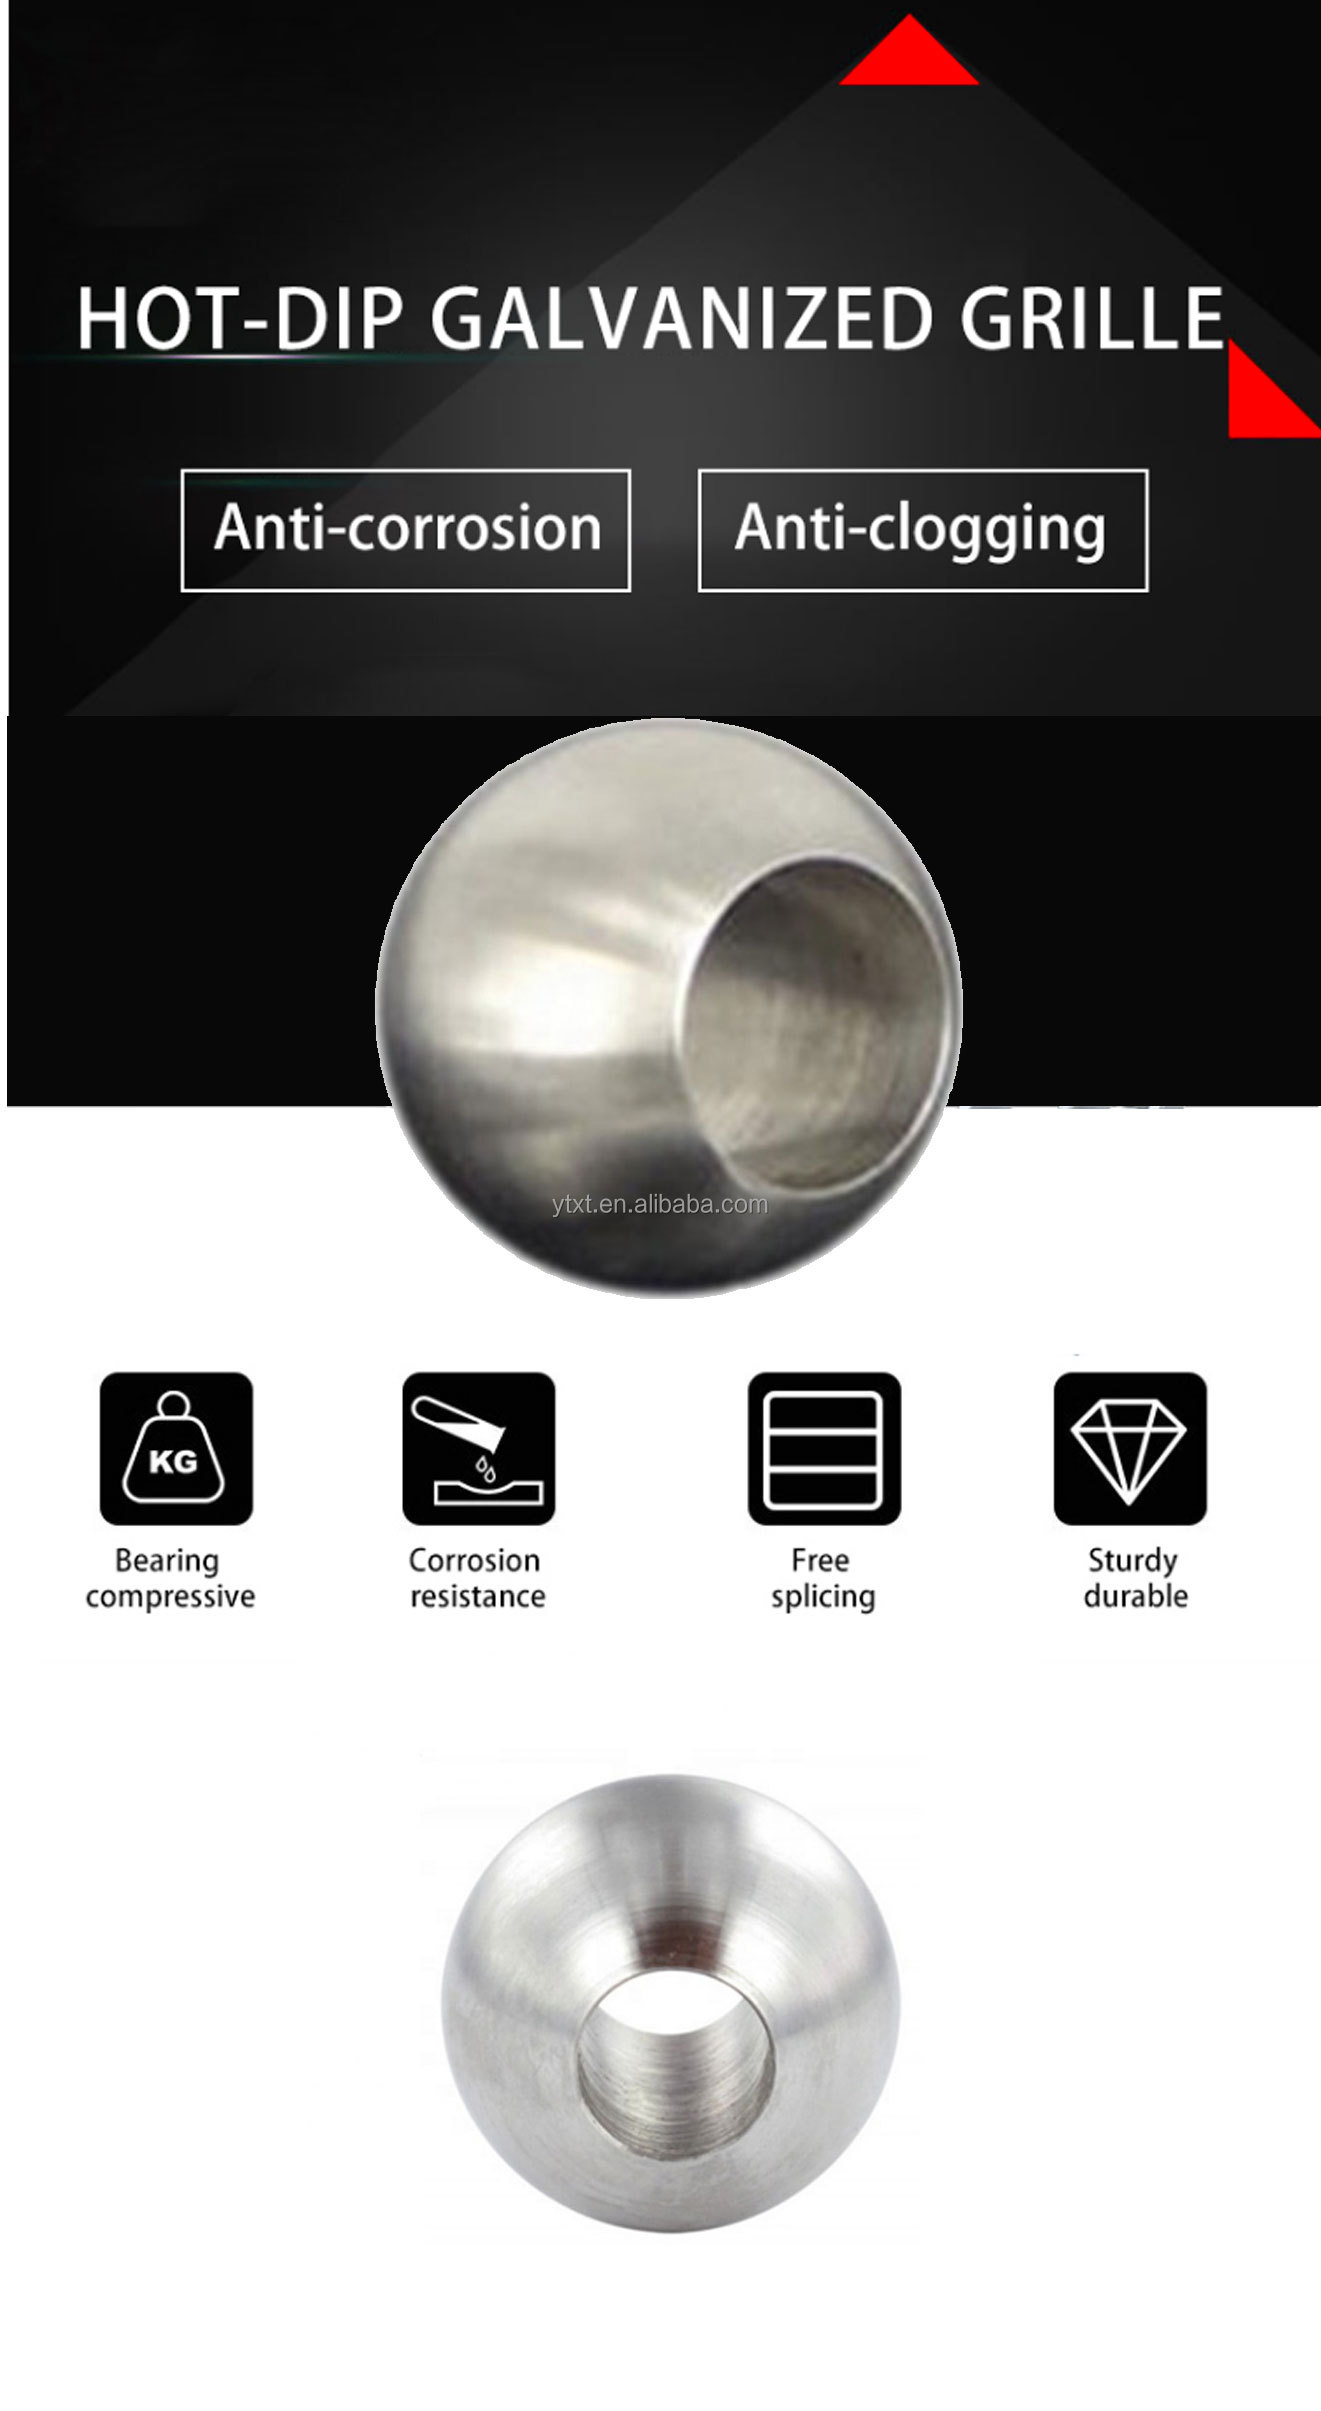 high quality large  carbon steel ball function  steel railing balls